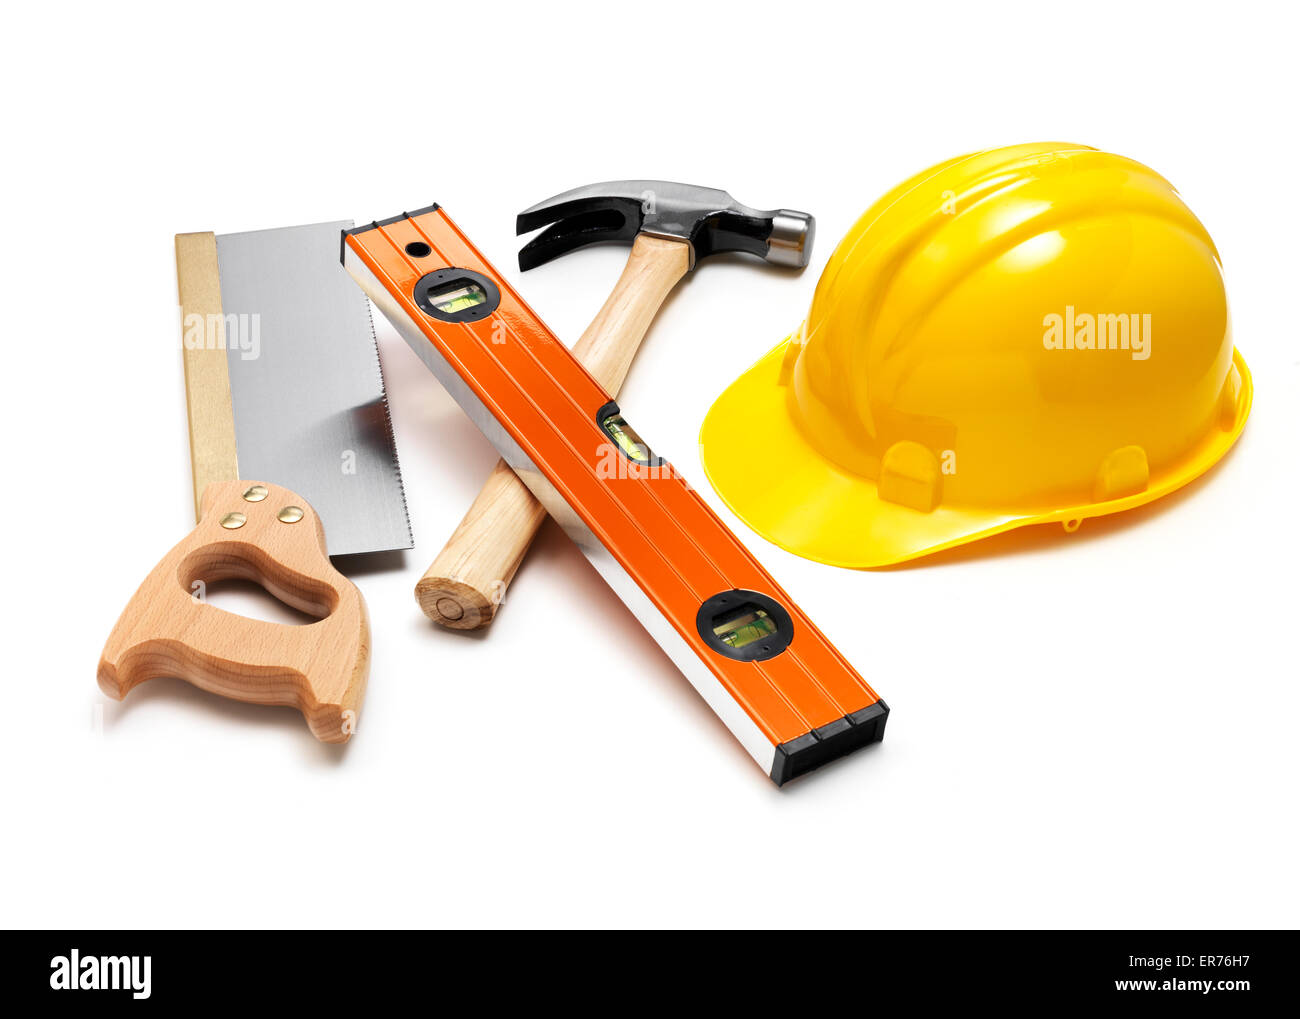 Selection of work tools isolated on a white background Stock Photo